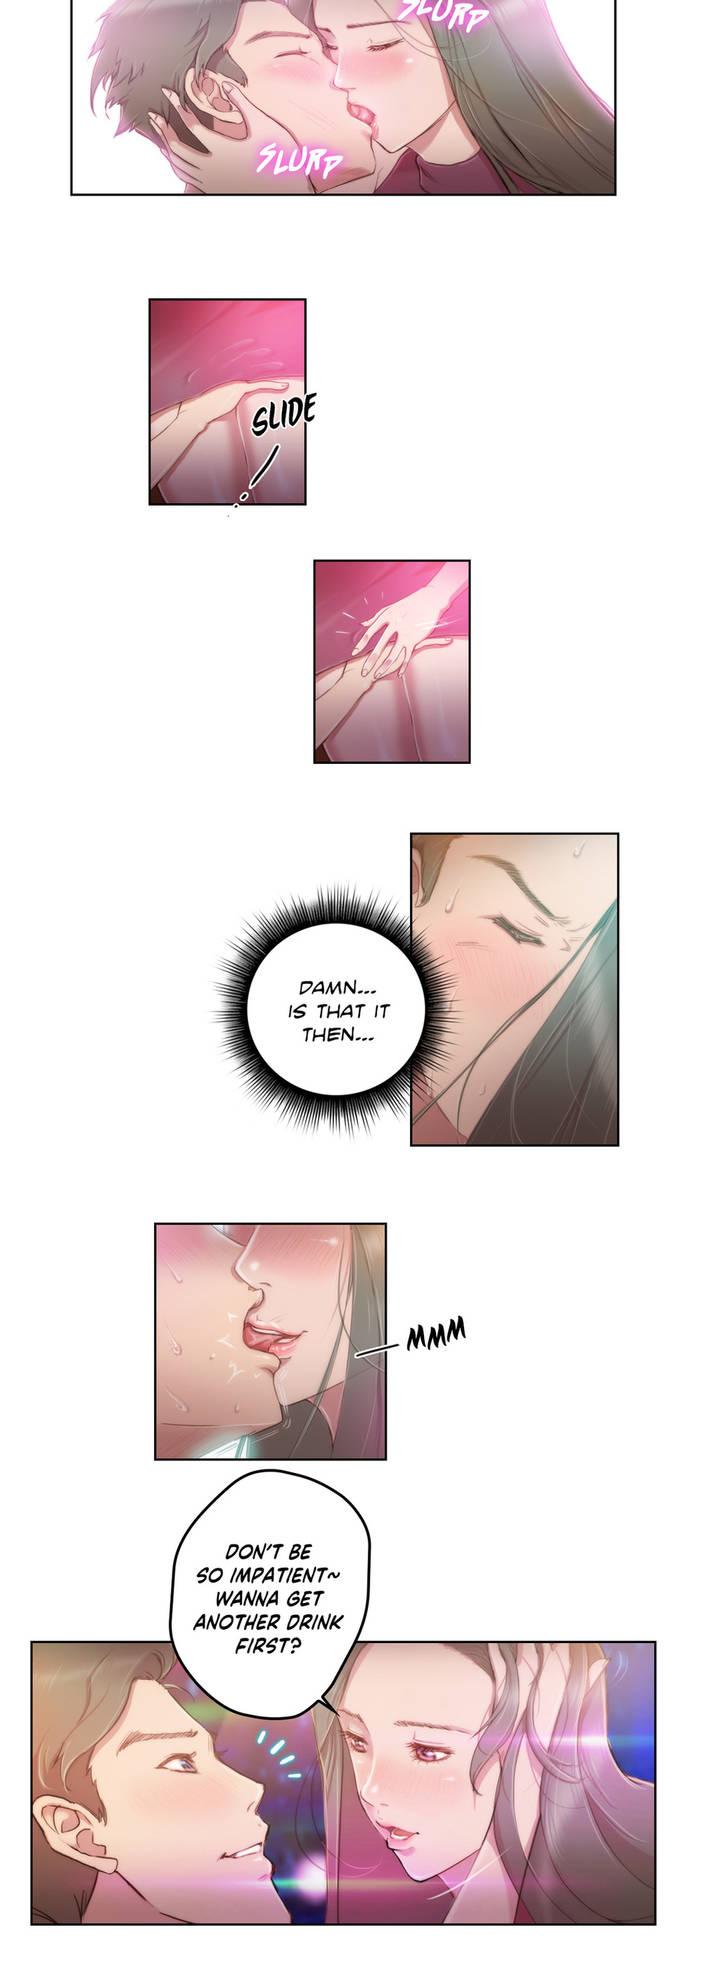 Indoor [BYMAN] Sex Knights-Erotic Sensuality & Perception Ch.1-12 (English) (Ongoing) Bbc - Page 4